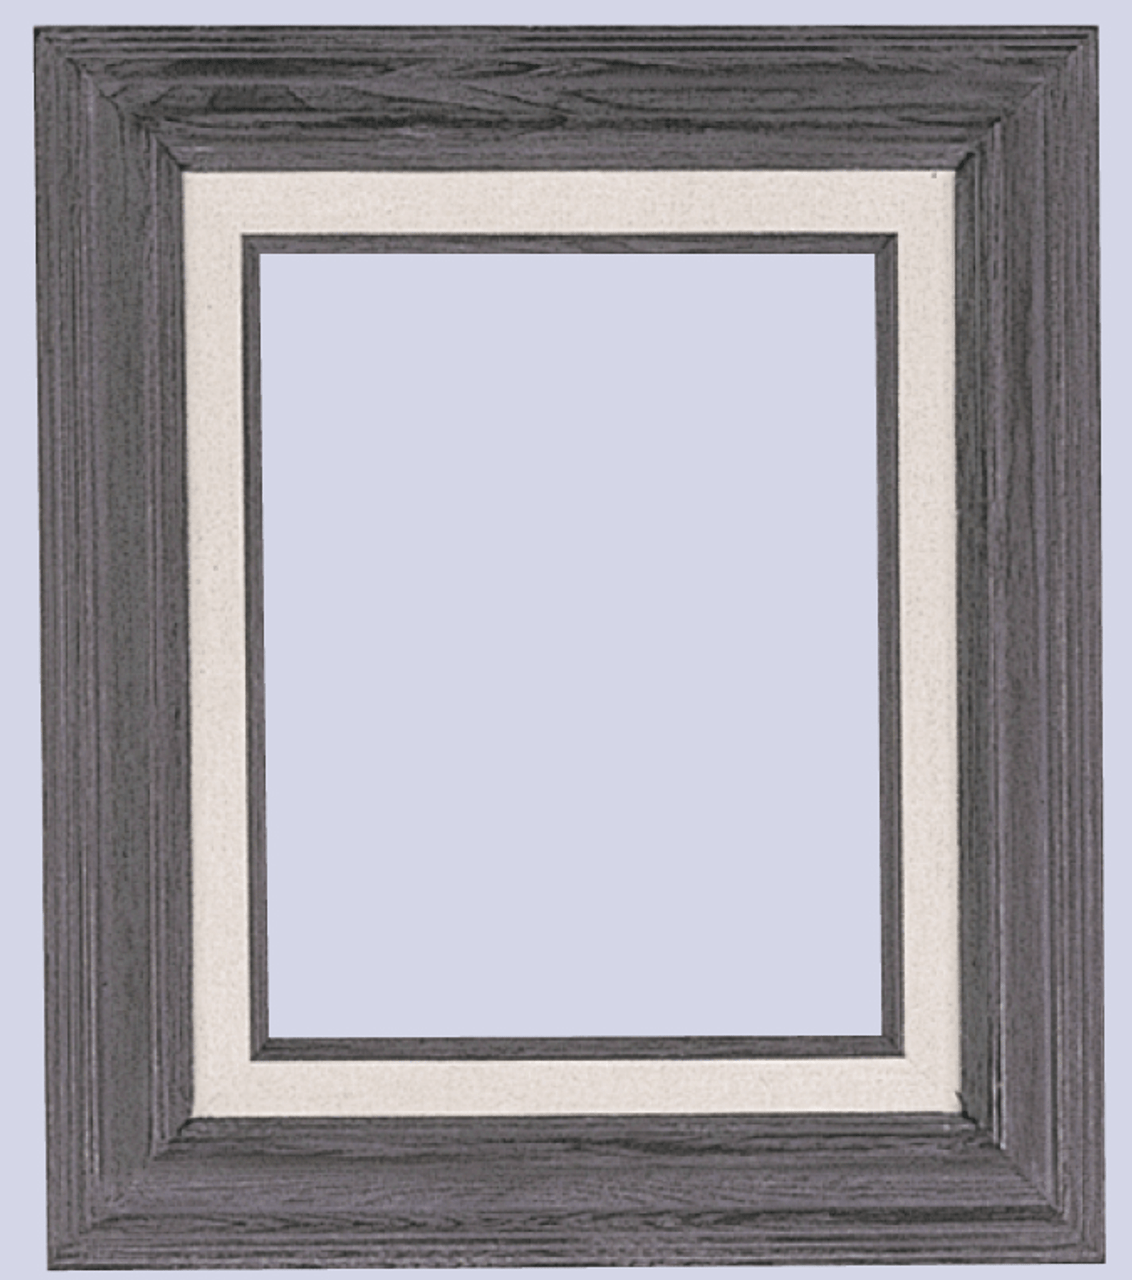 3 Inch Econo Wood Frames With Linen Liners: 9X24*